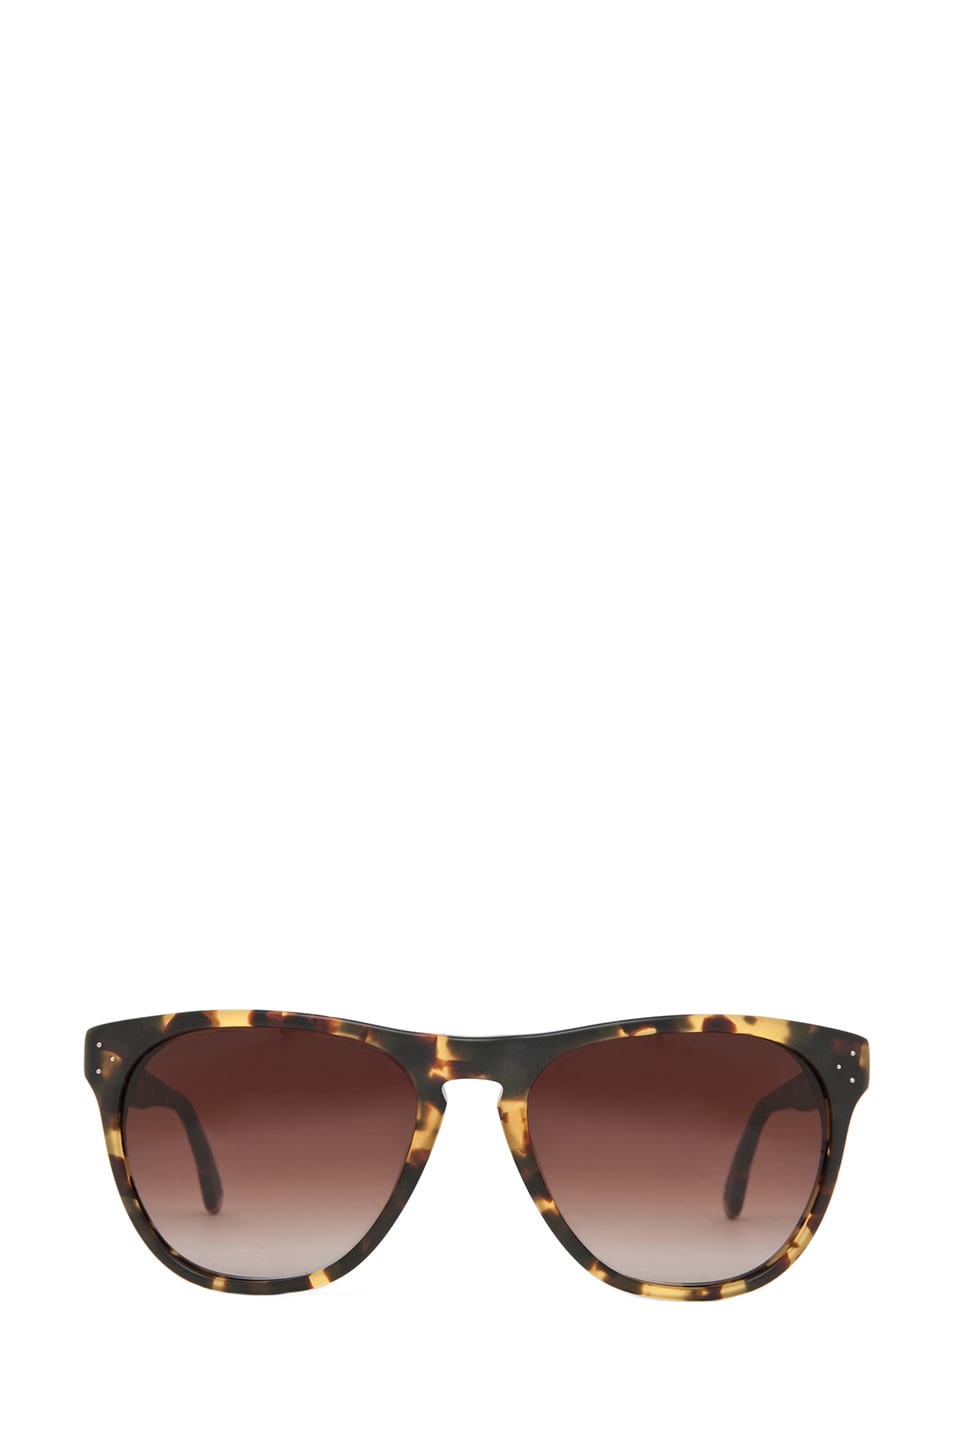 Image 1 of Oliver Peoples Daddy B Sunglasses in Matte Dark Brown Tortoise